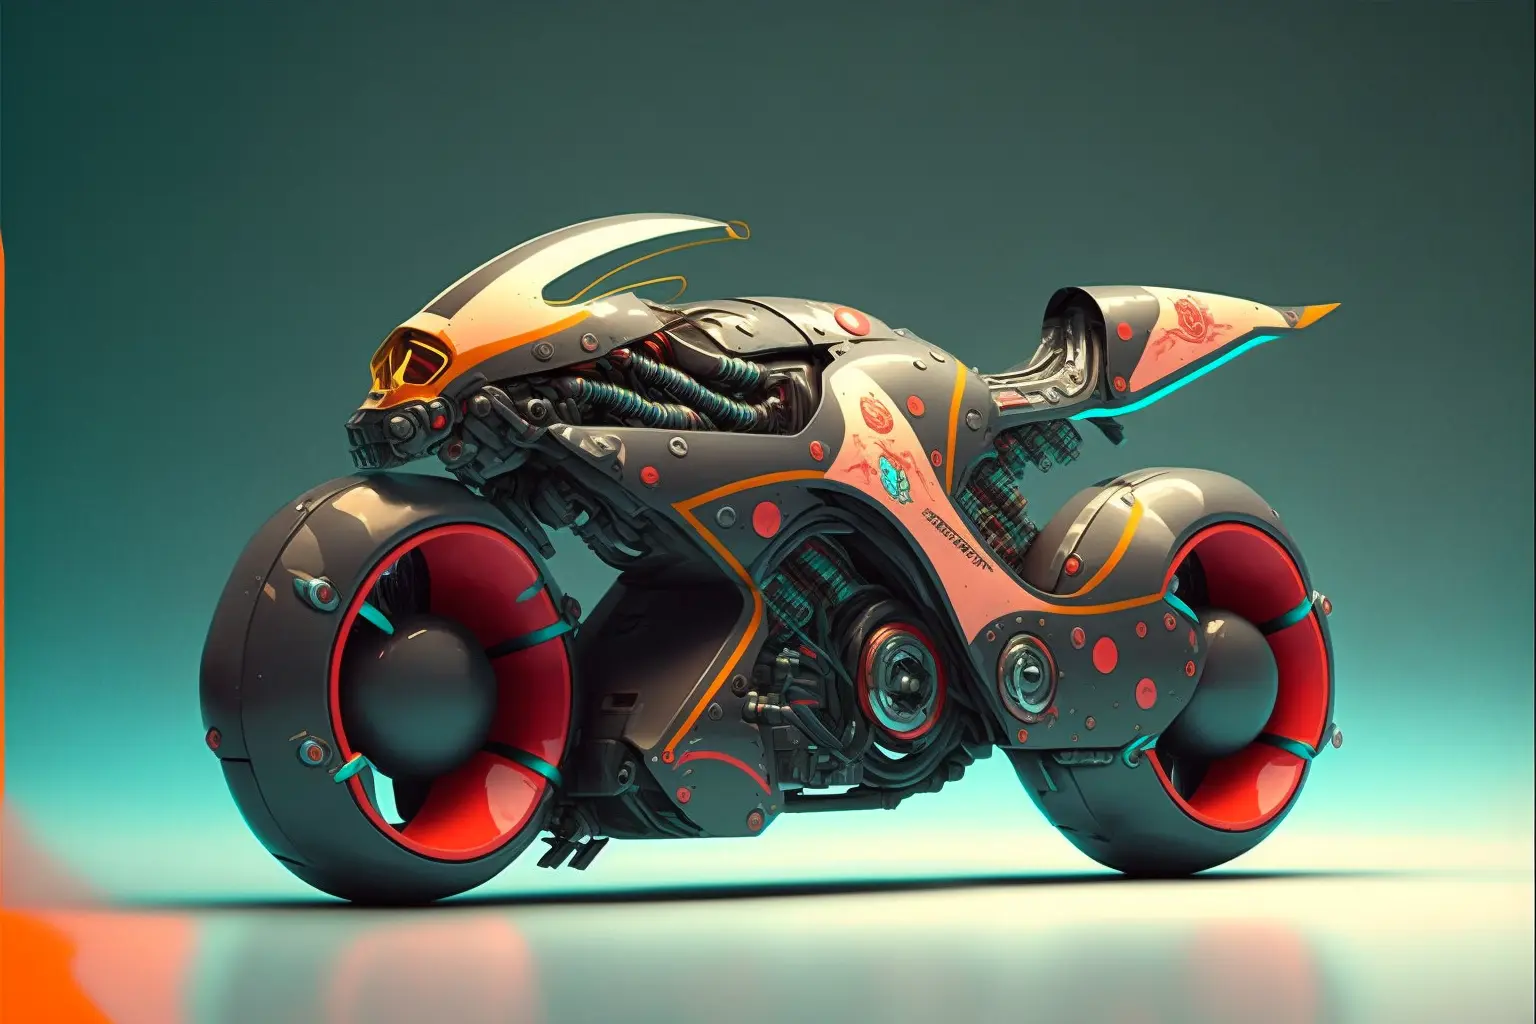 futuristic motorcycle concept inspired by Akira motorcycle